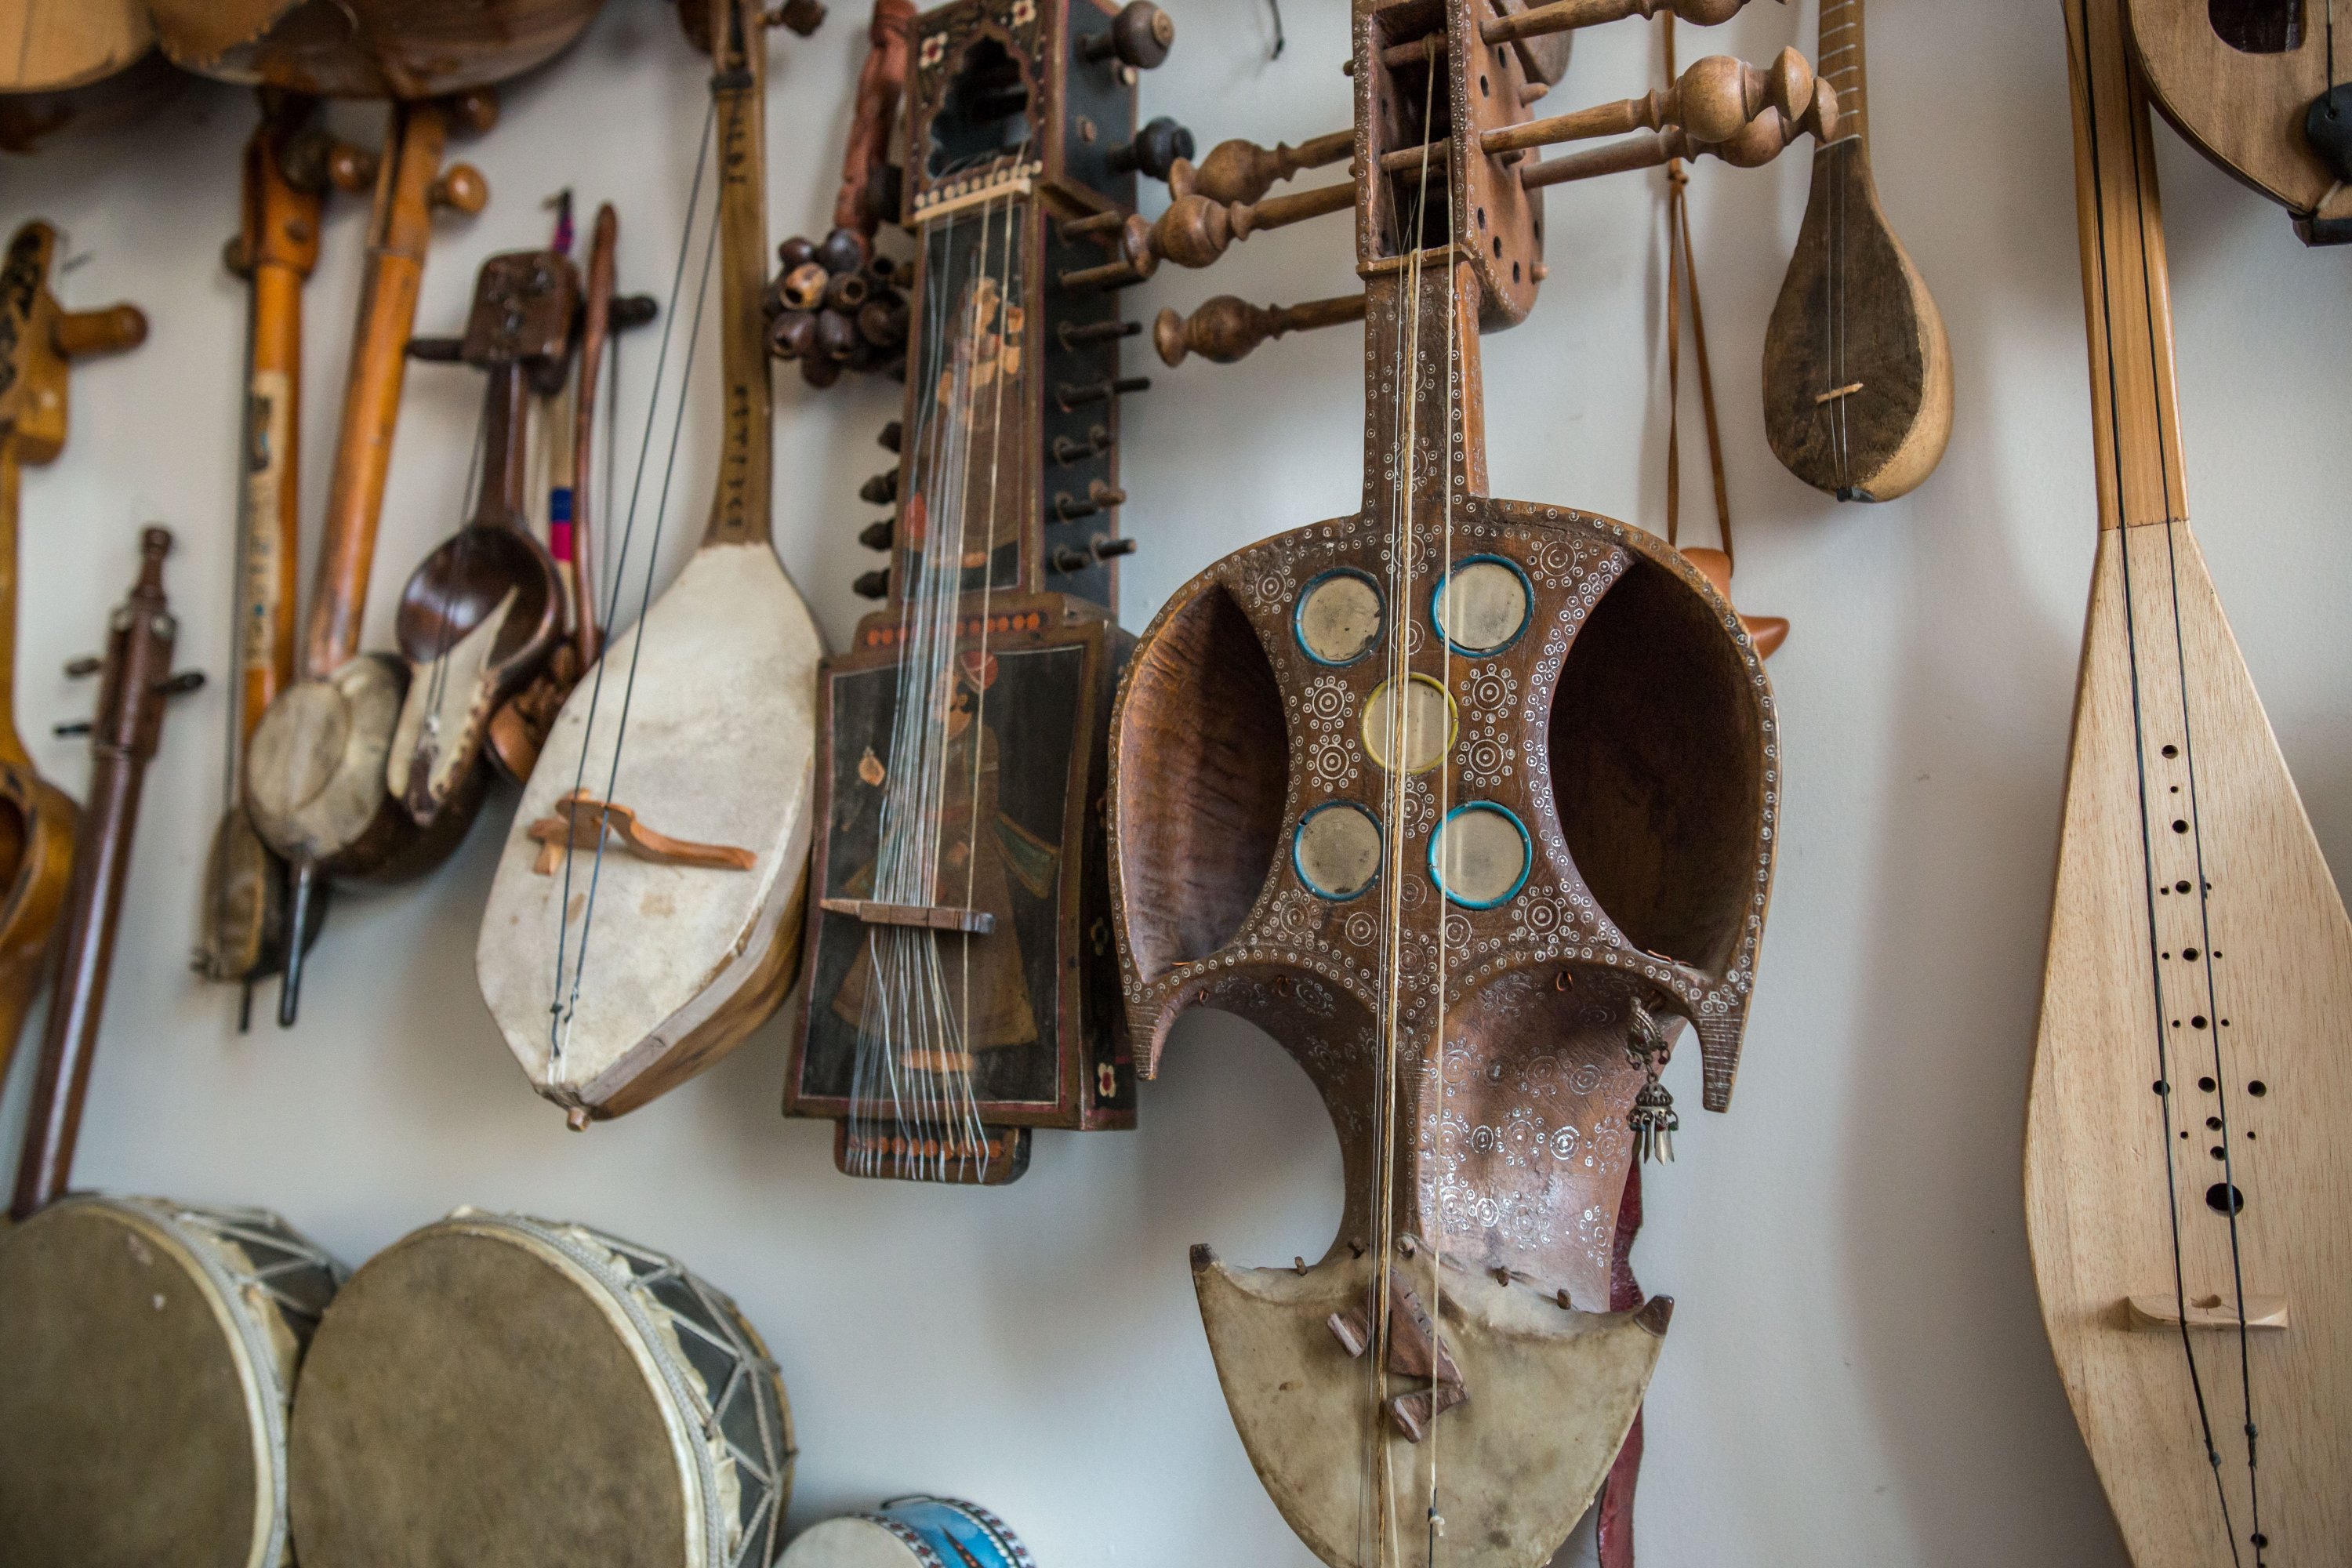 A selection of instruments made by Feridun Obul at his workshop in Sultanahmet Square, Istanbul, Turkey, June 23, 2018. (PHOTO BY MURAT ŞENGÜL)